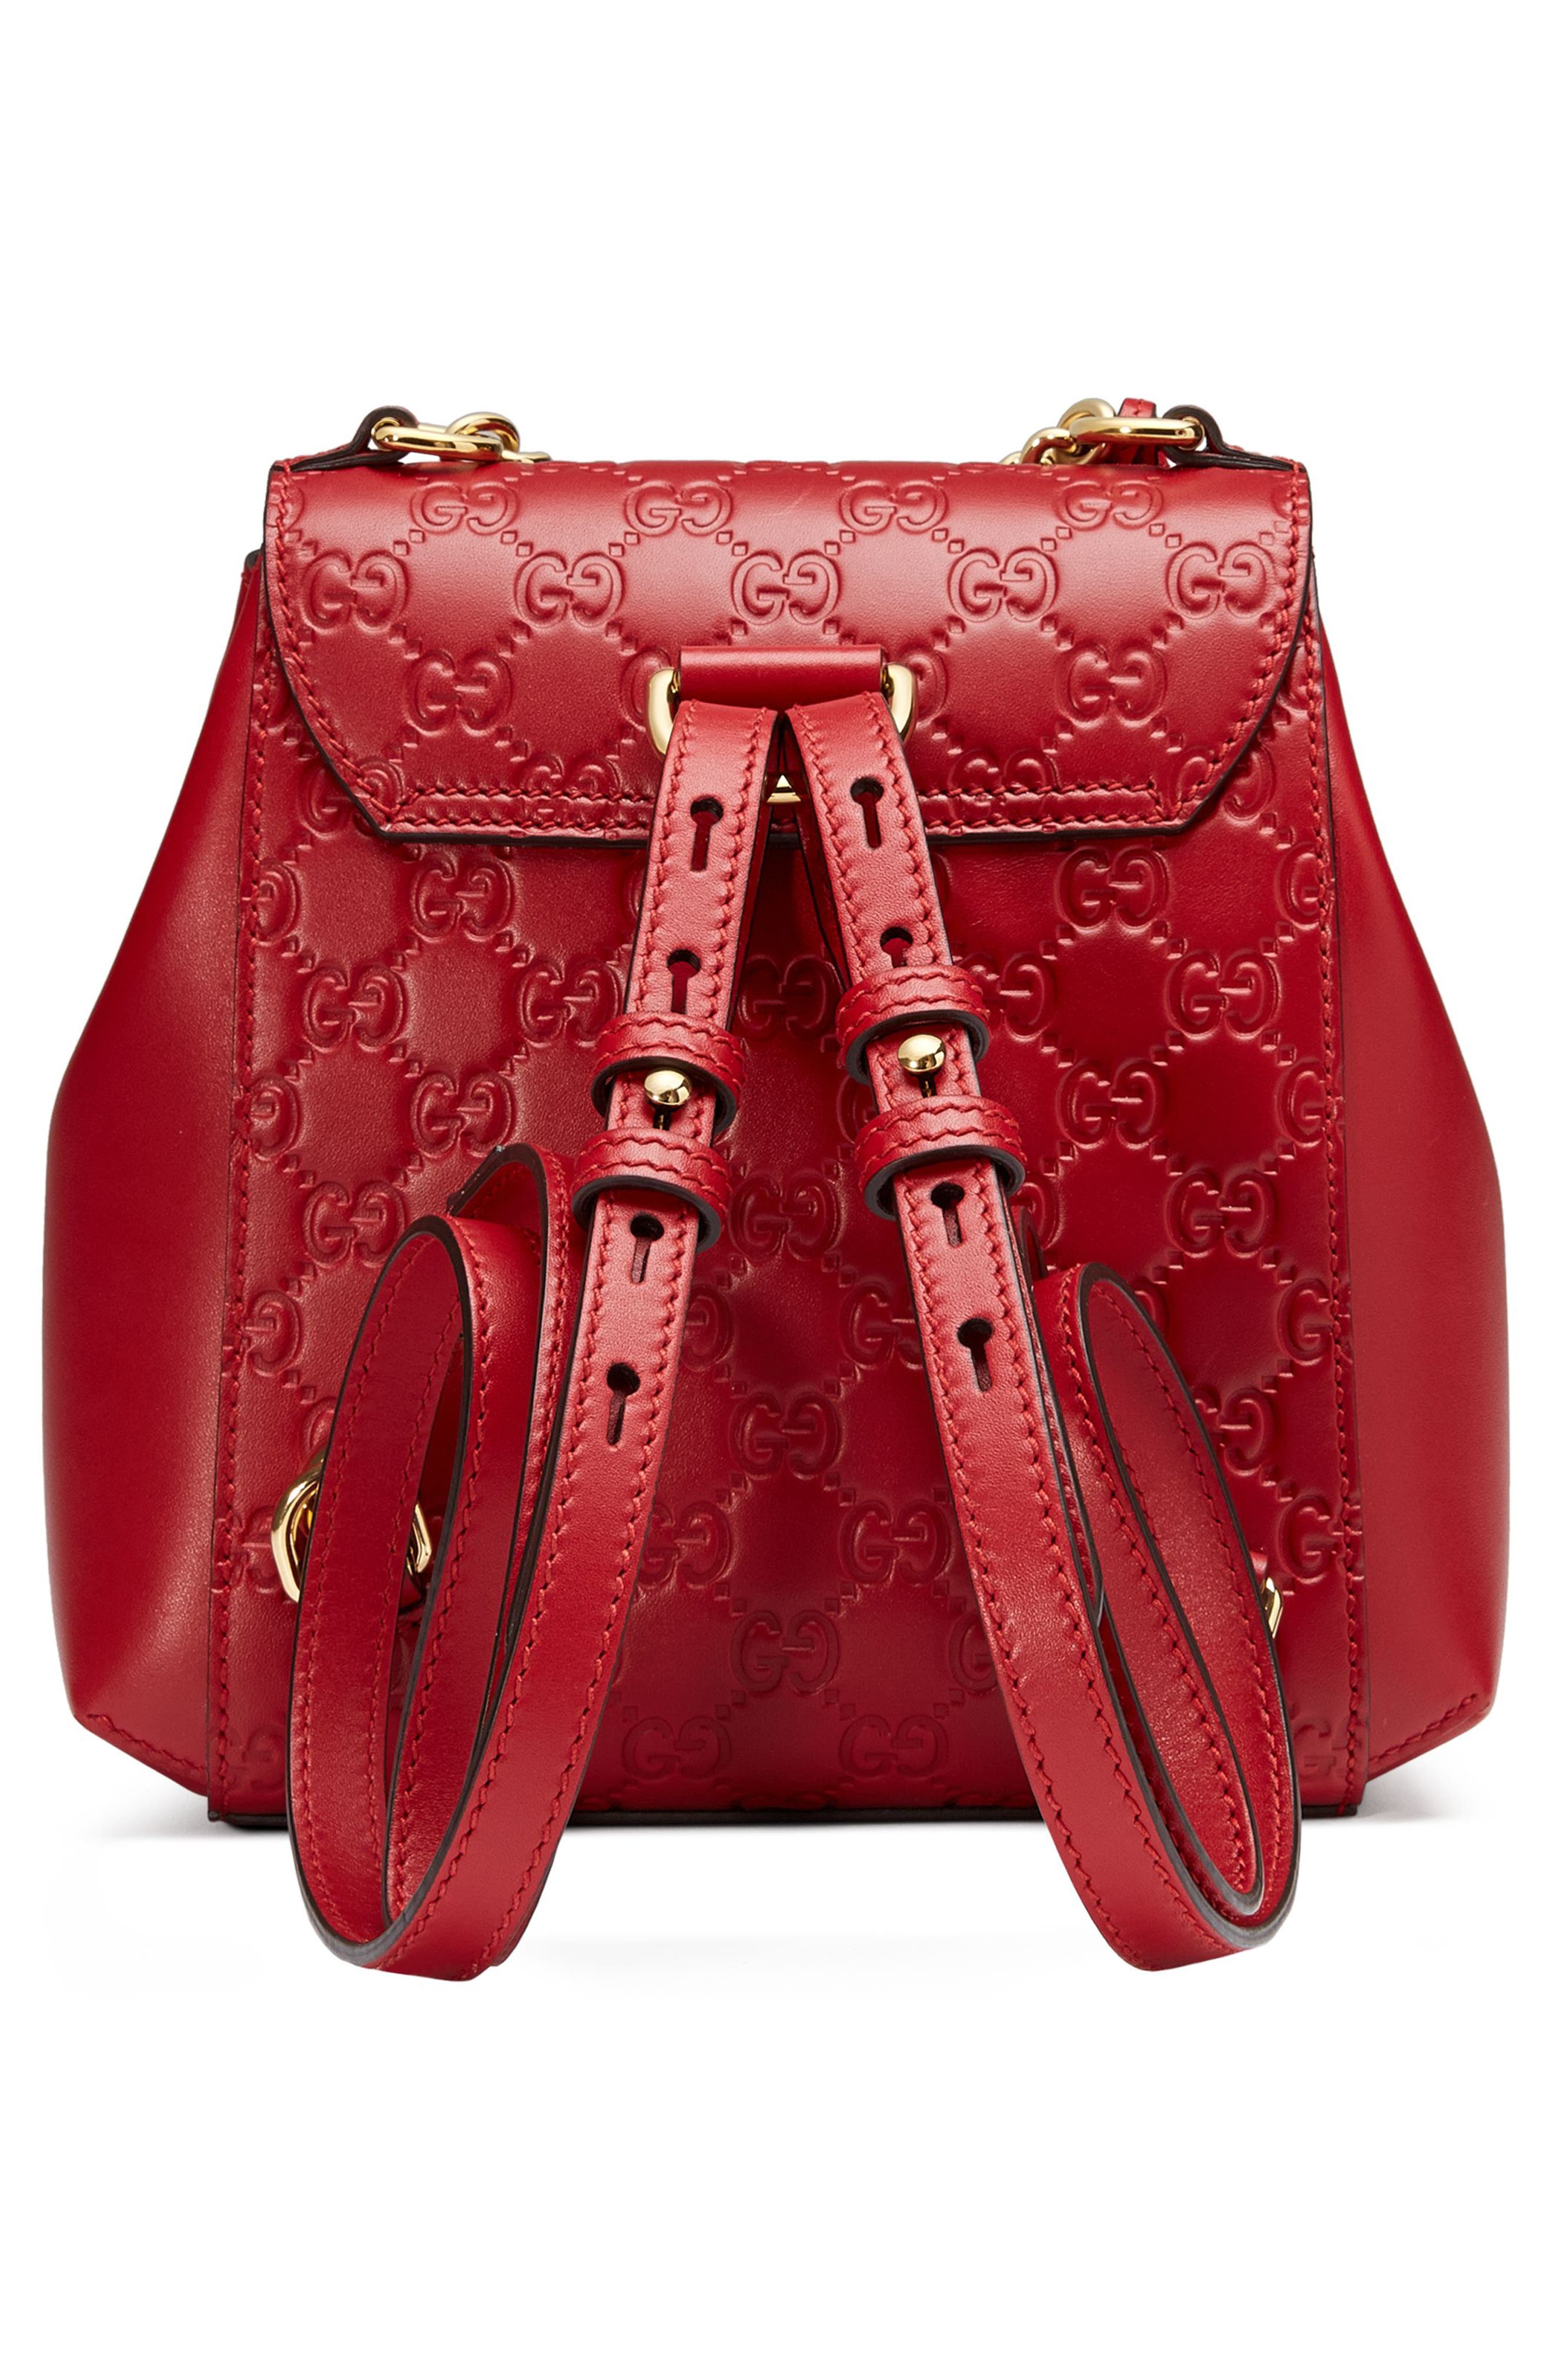 GUCCI Gg Supreme Leather Padlock Backpack - Red | ModeSens